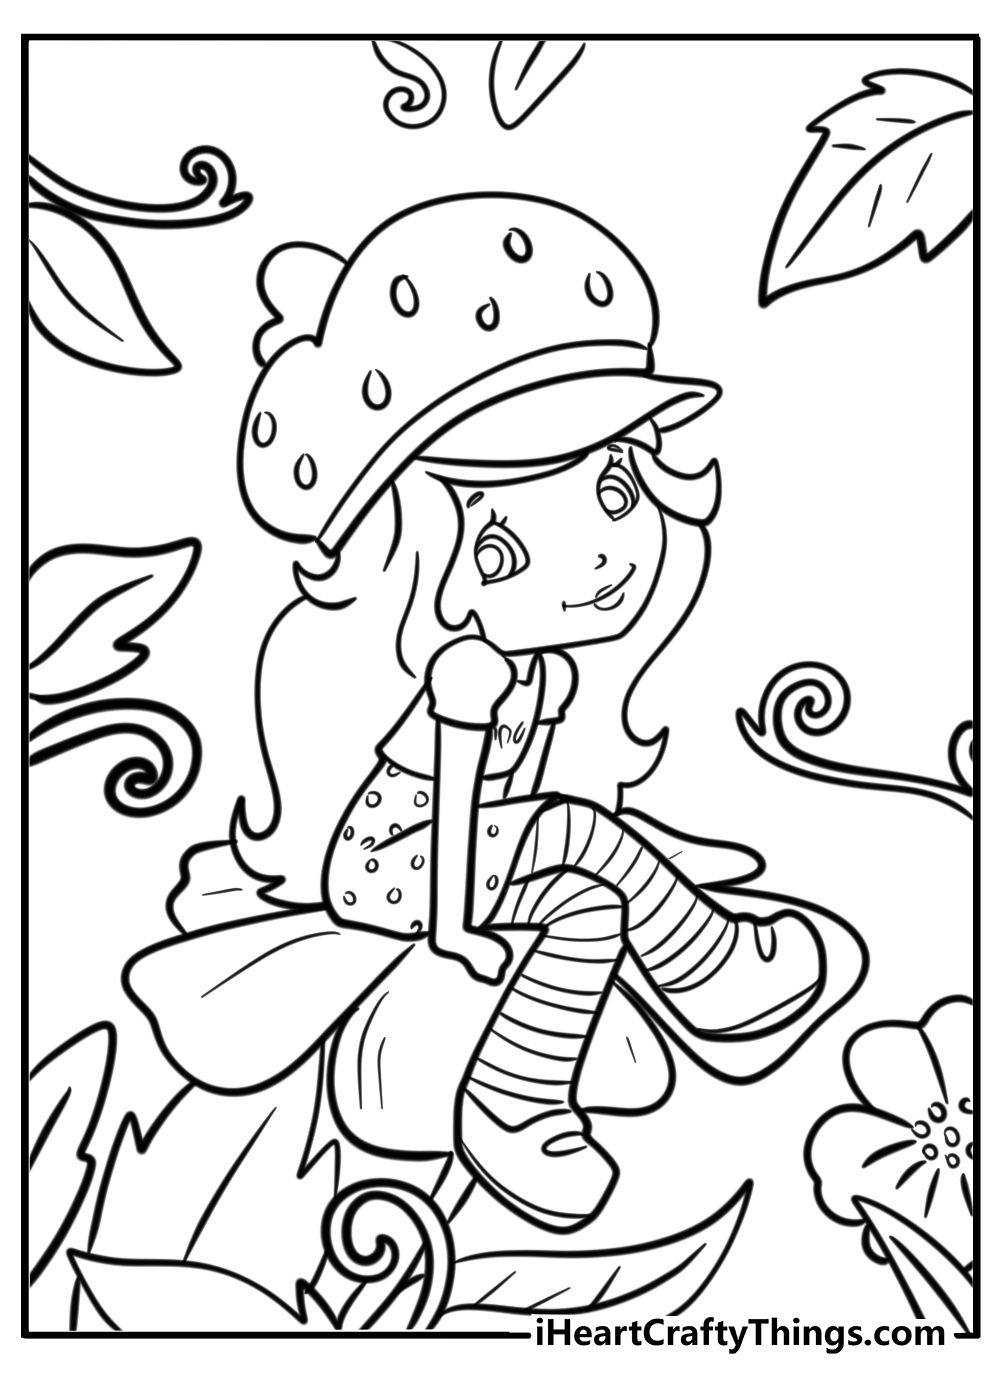 Strawberry shortcake coloring page sitting on flower